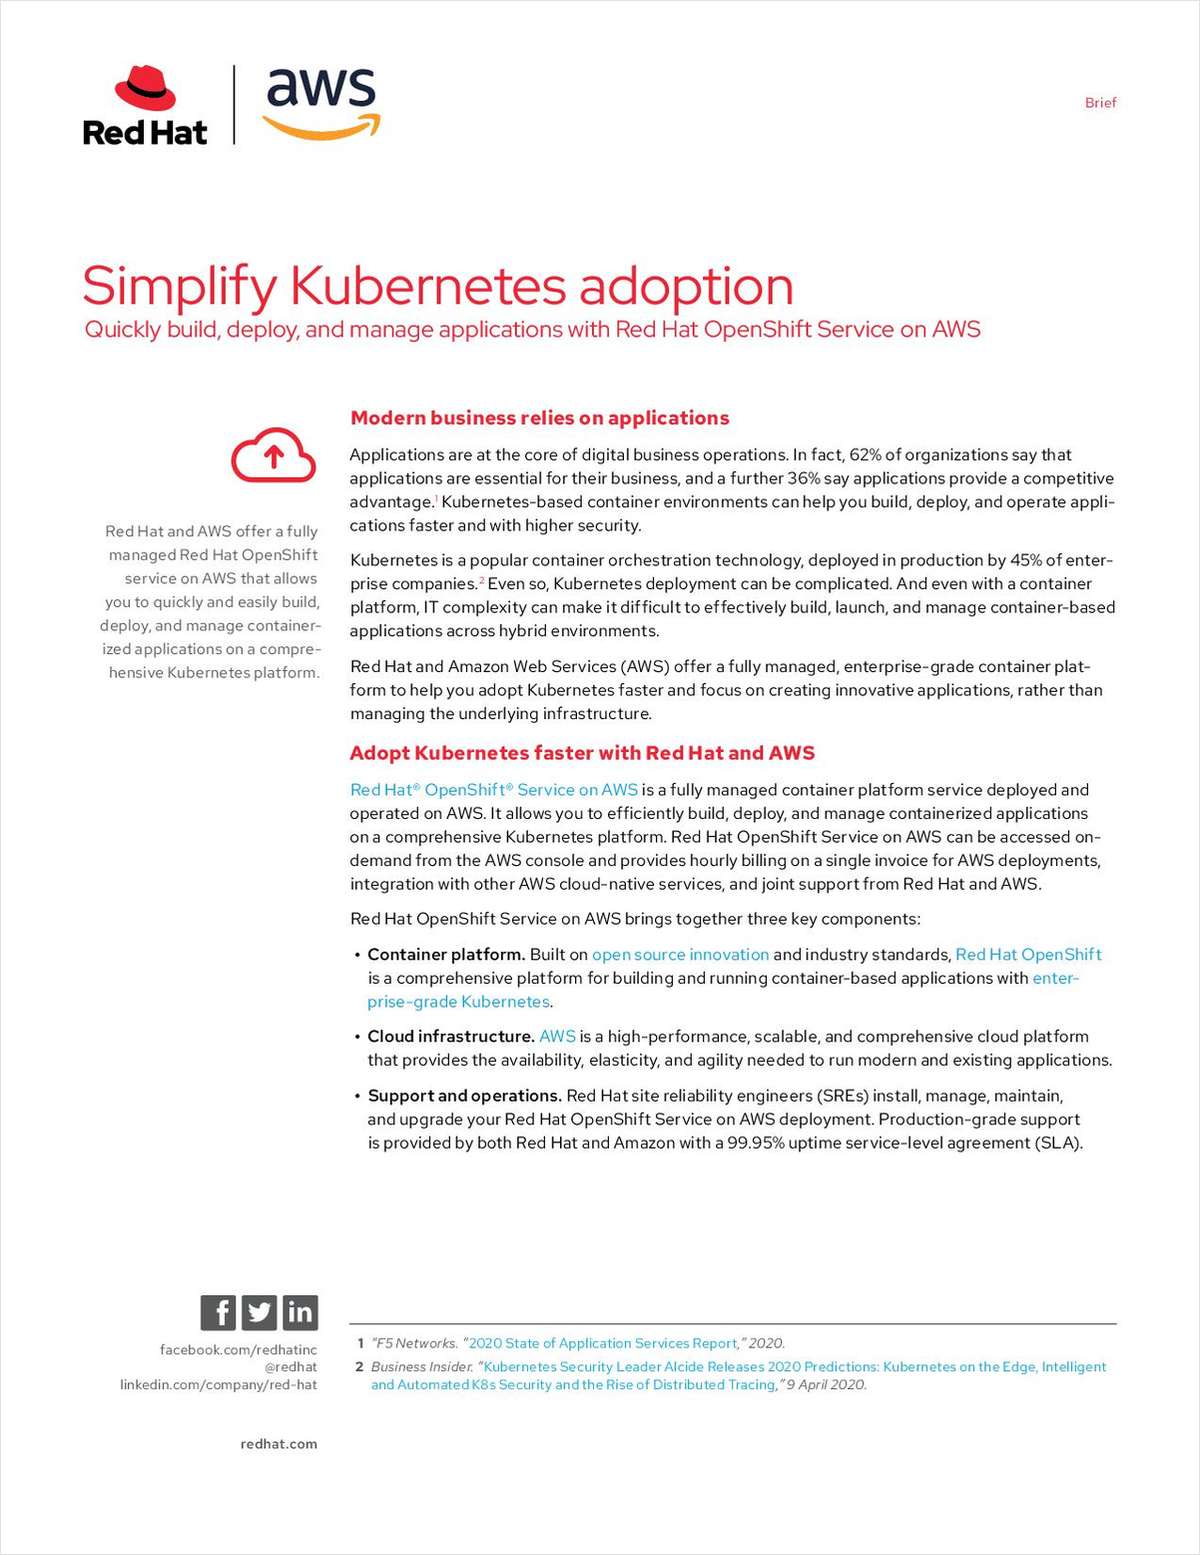 Learn How to Simplify Kubernetes Adoption